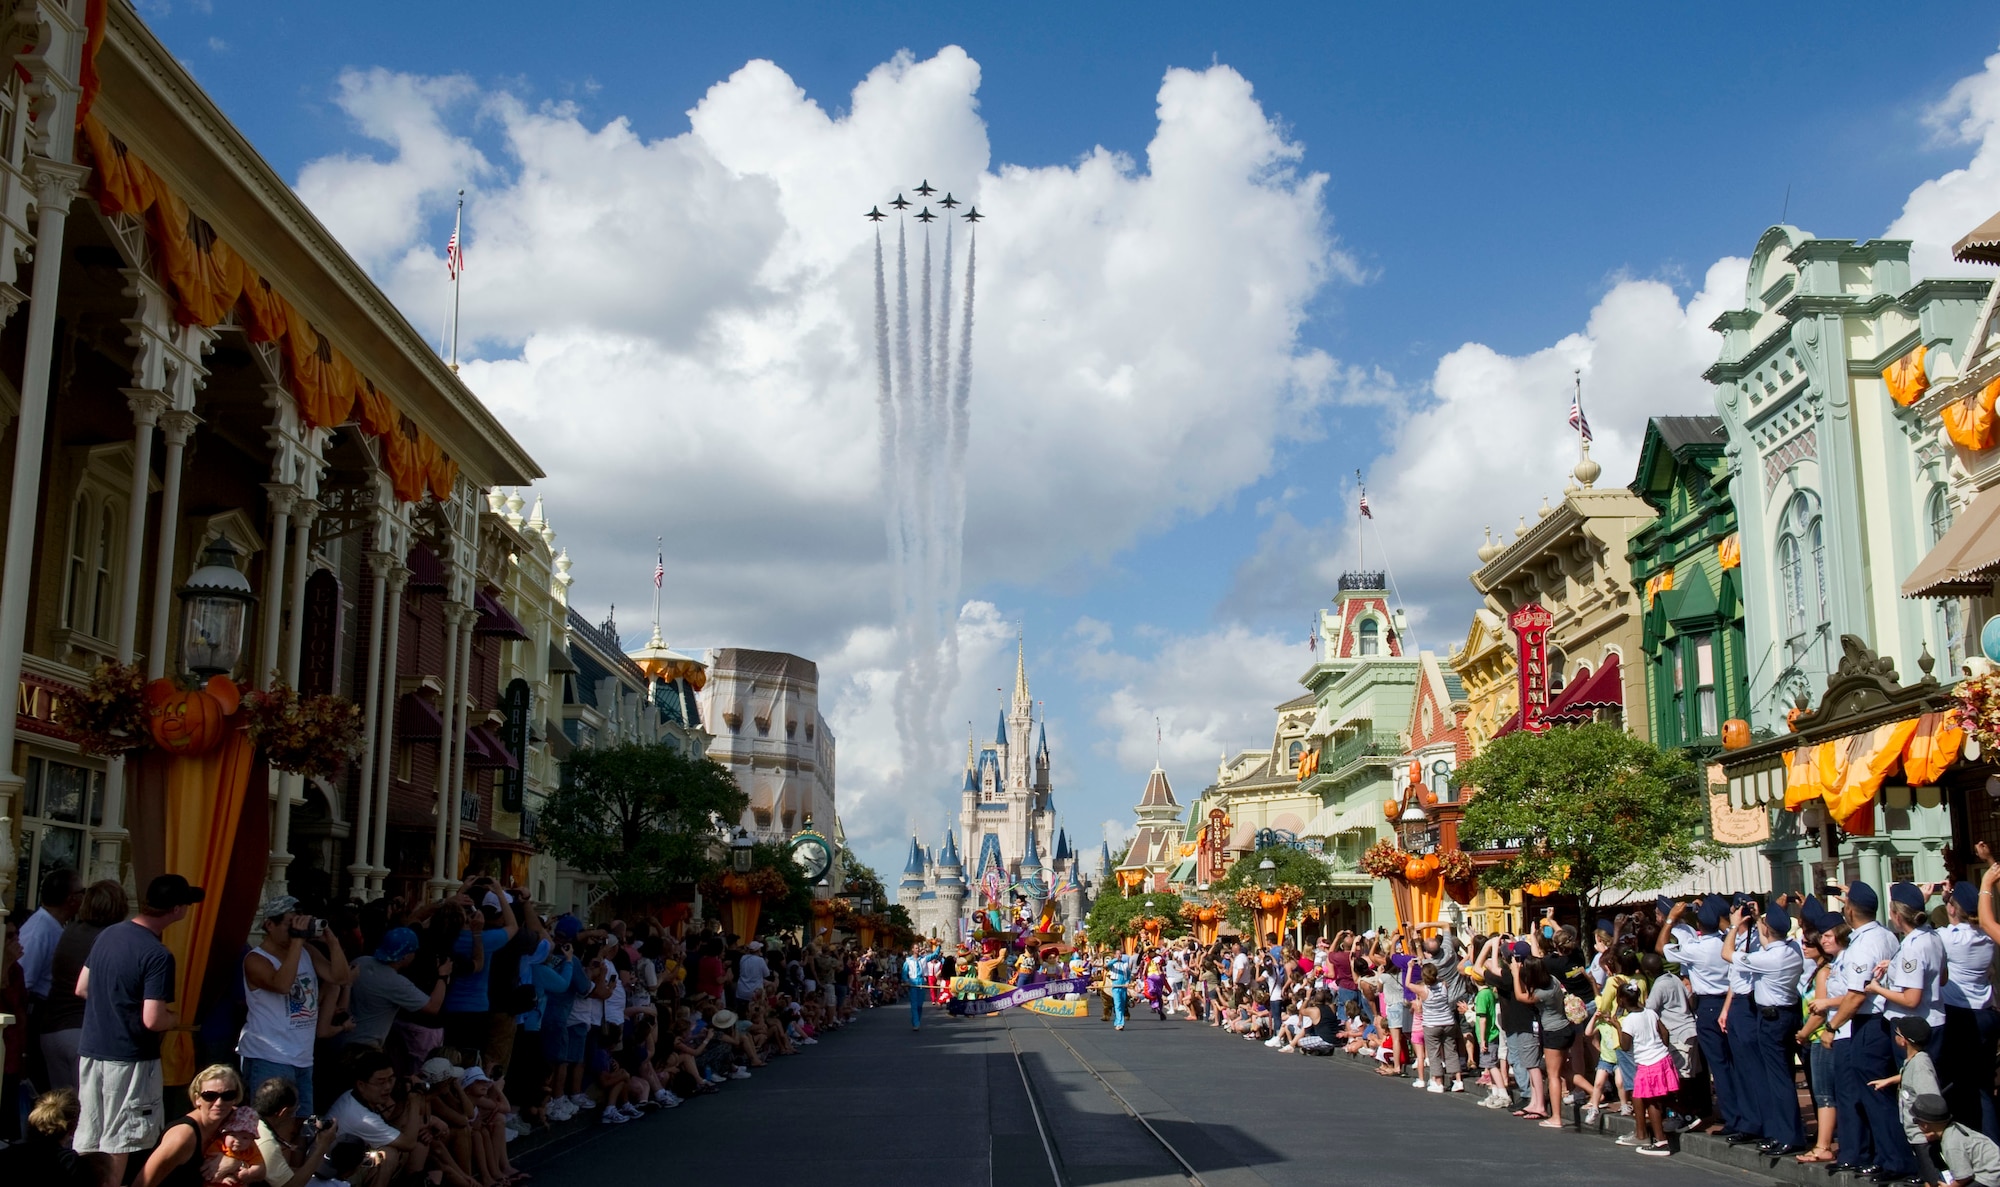 The Thunderbirds, the U.S. Air Force air demonstration team, fly the delta formation over Cinderella's Castle and main street at Disney World in Orlando, Fla., Oct. 26, 2010. Central Florida celebrates Air Force Week with a magical tribute to the local community and military. The theme park dedicated an entire day of events to Air Force servicemembers and their families.  (U.S. Air Force photo/Staff Sgt. Larry E. Reid Jr.)